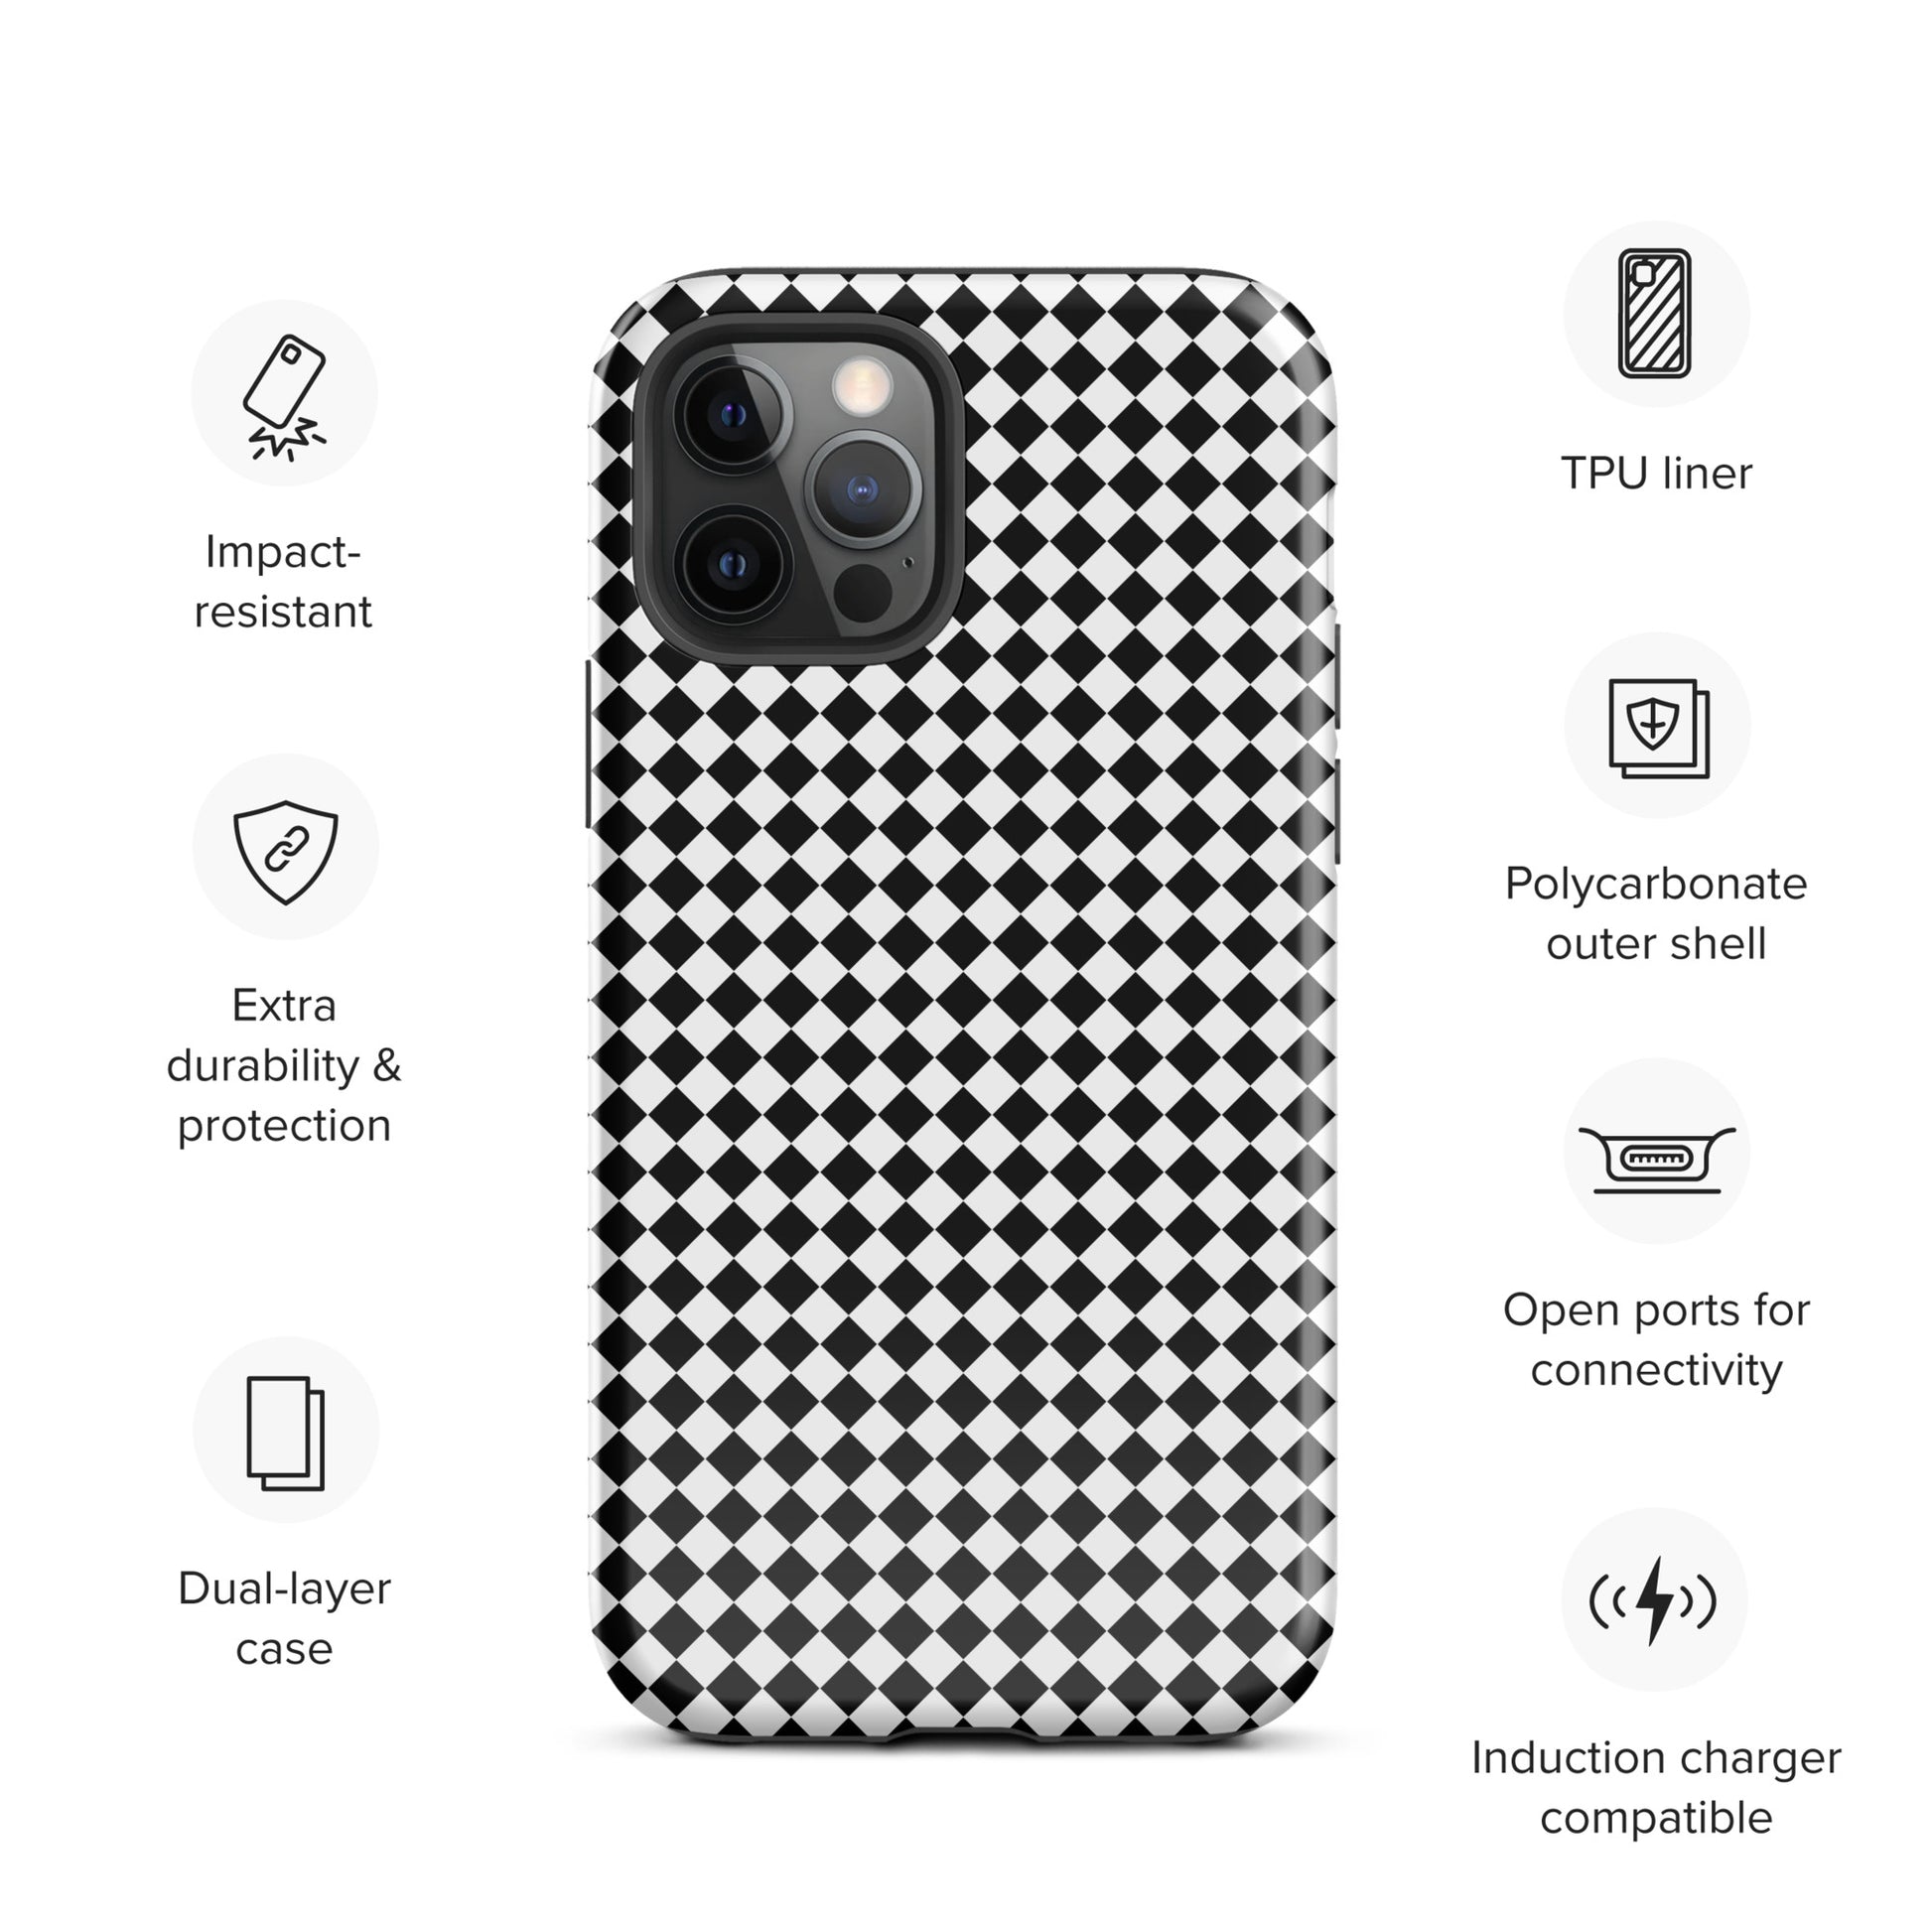 Tough case for Iphone with a print of a chessboard